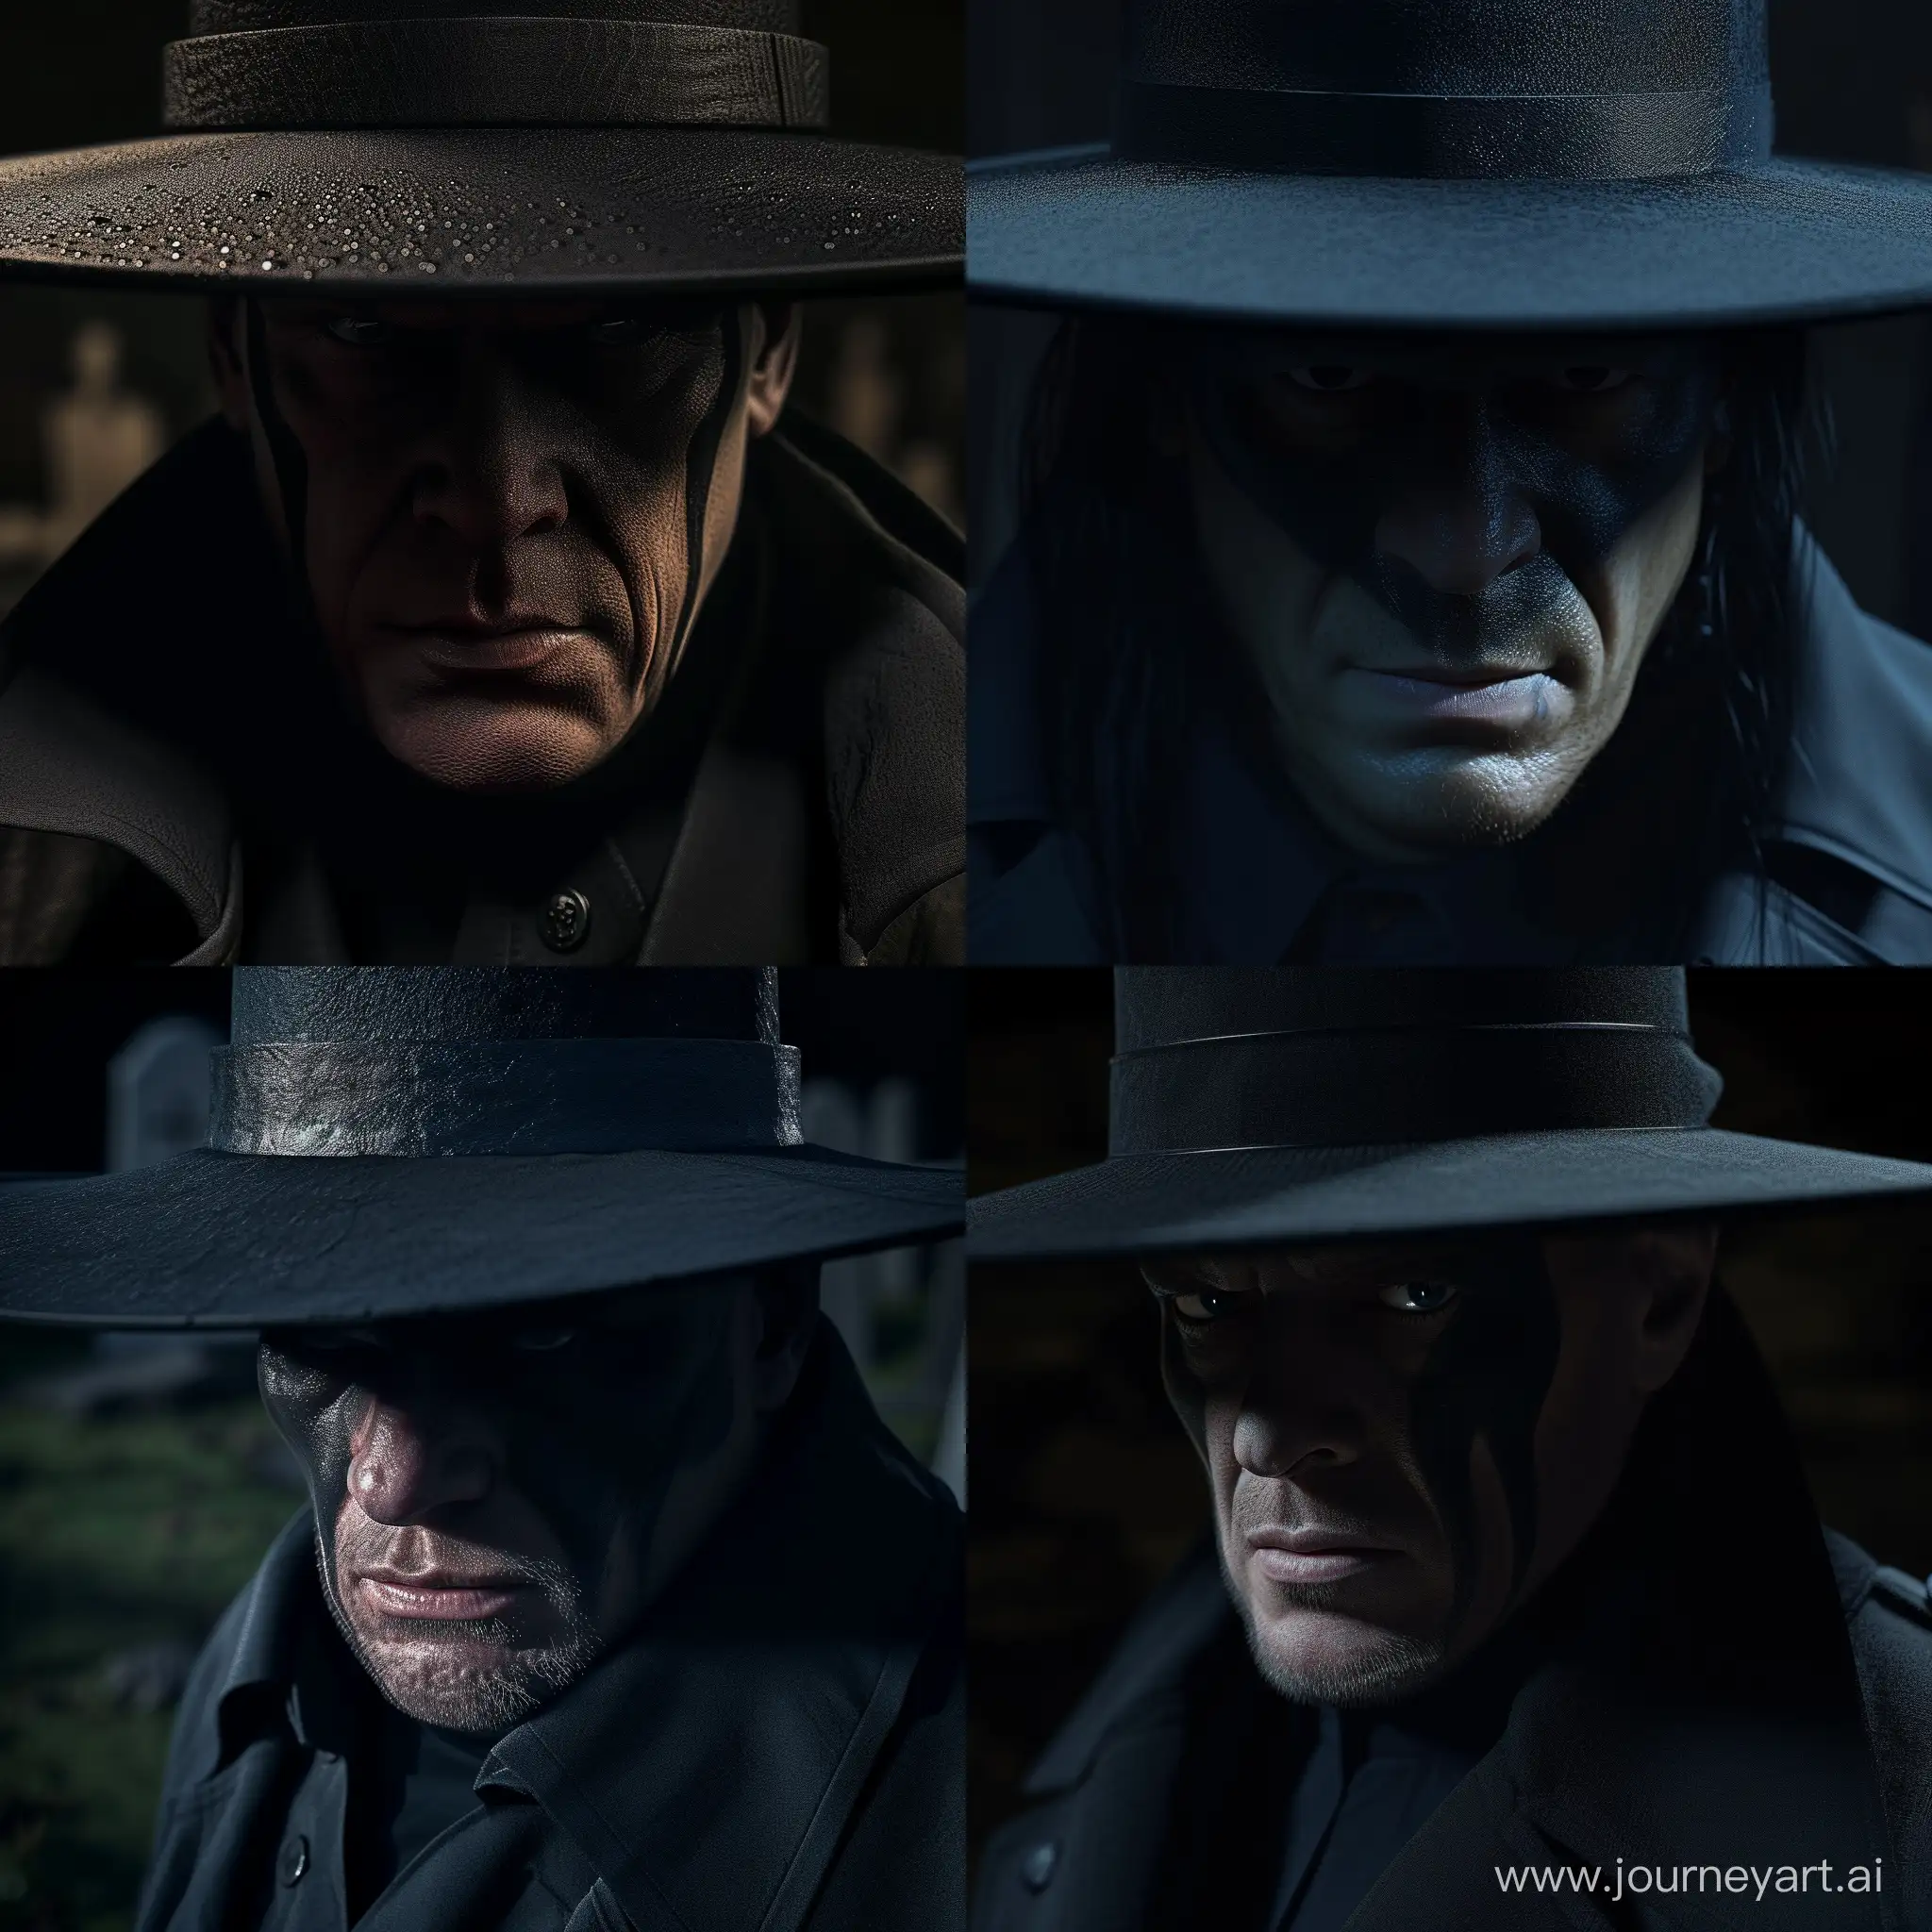 The-Undertaker-in-Iconic-Black-Hat-and-Trench-Coat-at-the-Dark-Graveyard